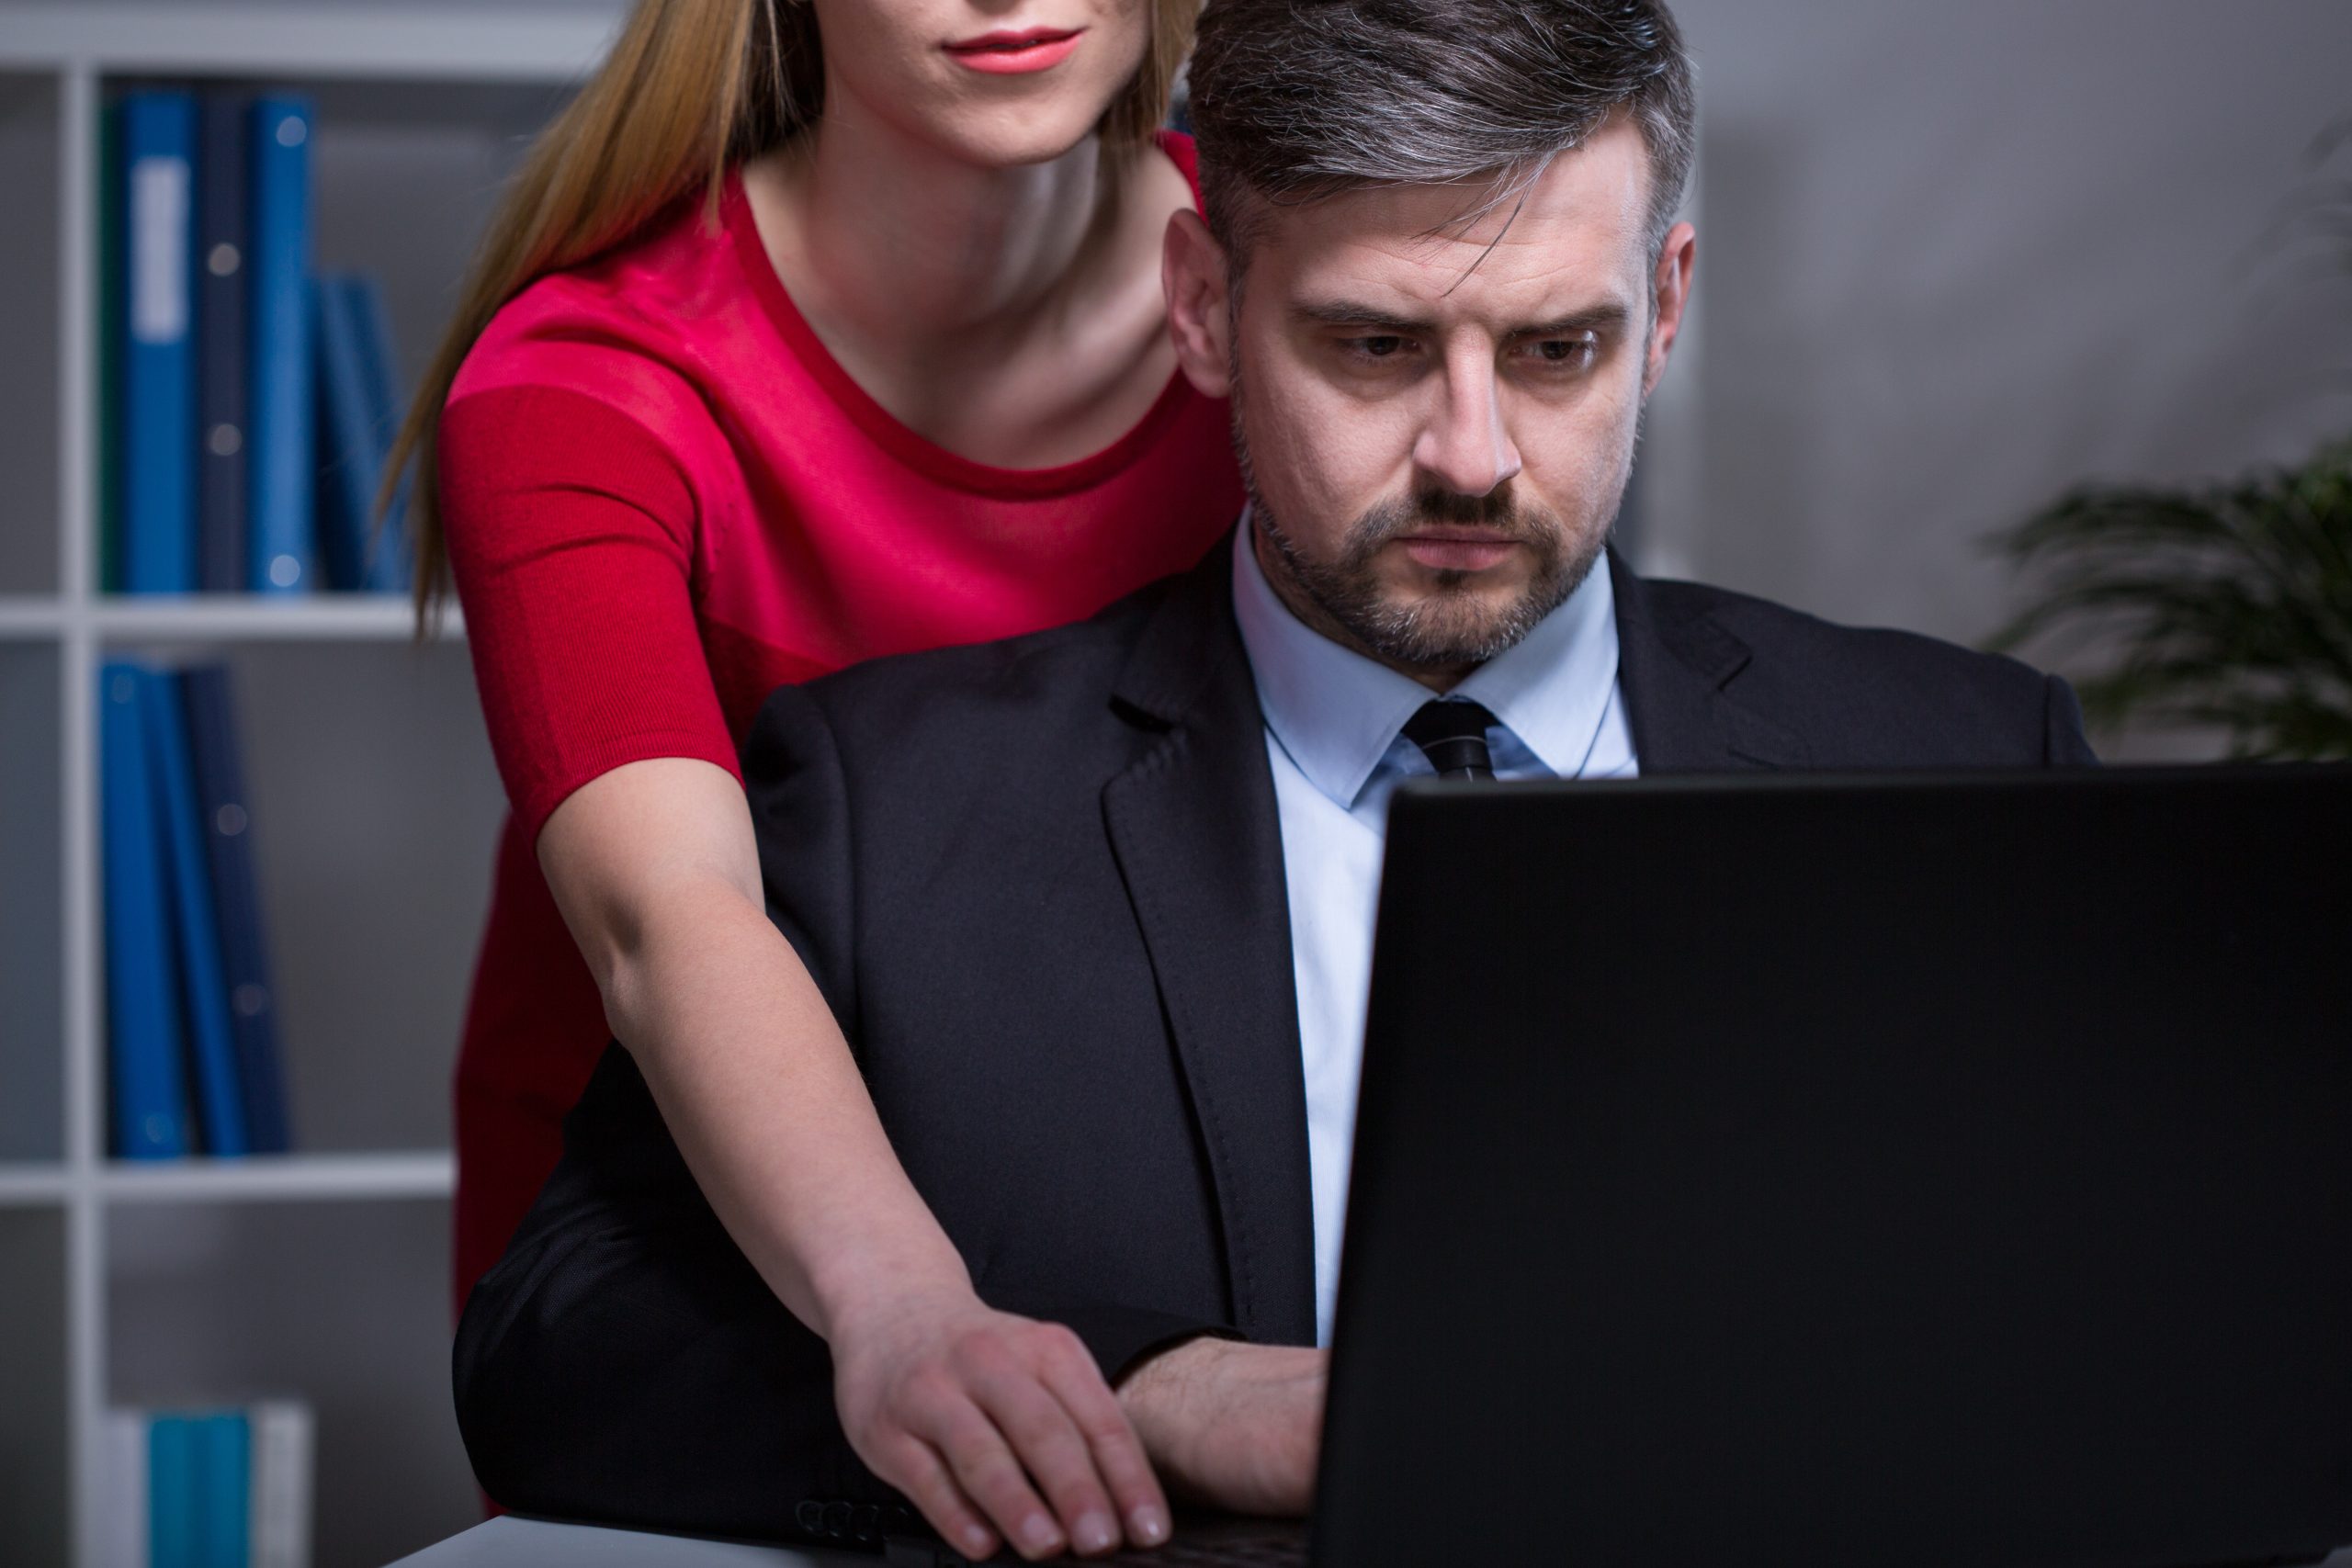 Workplace Sexual Harassment Investigations: The Typical Process